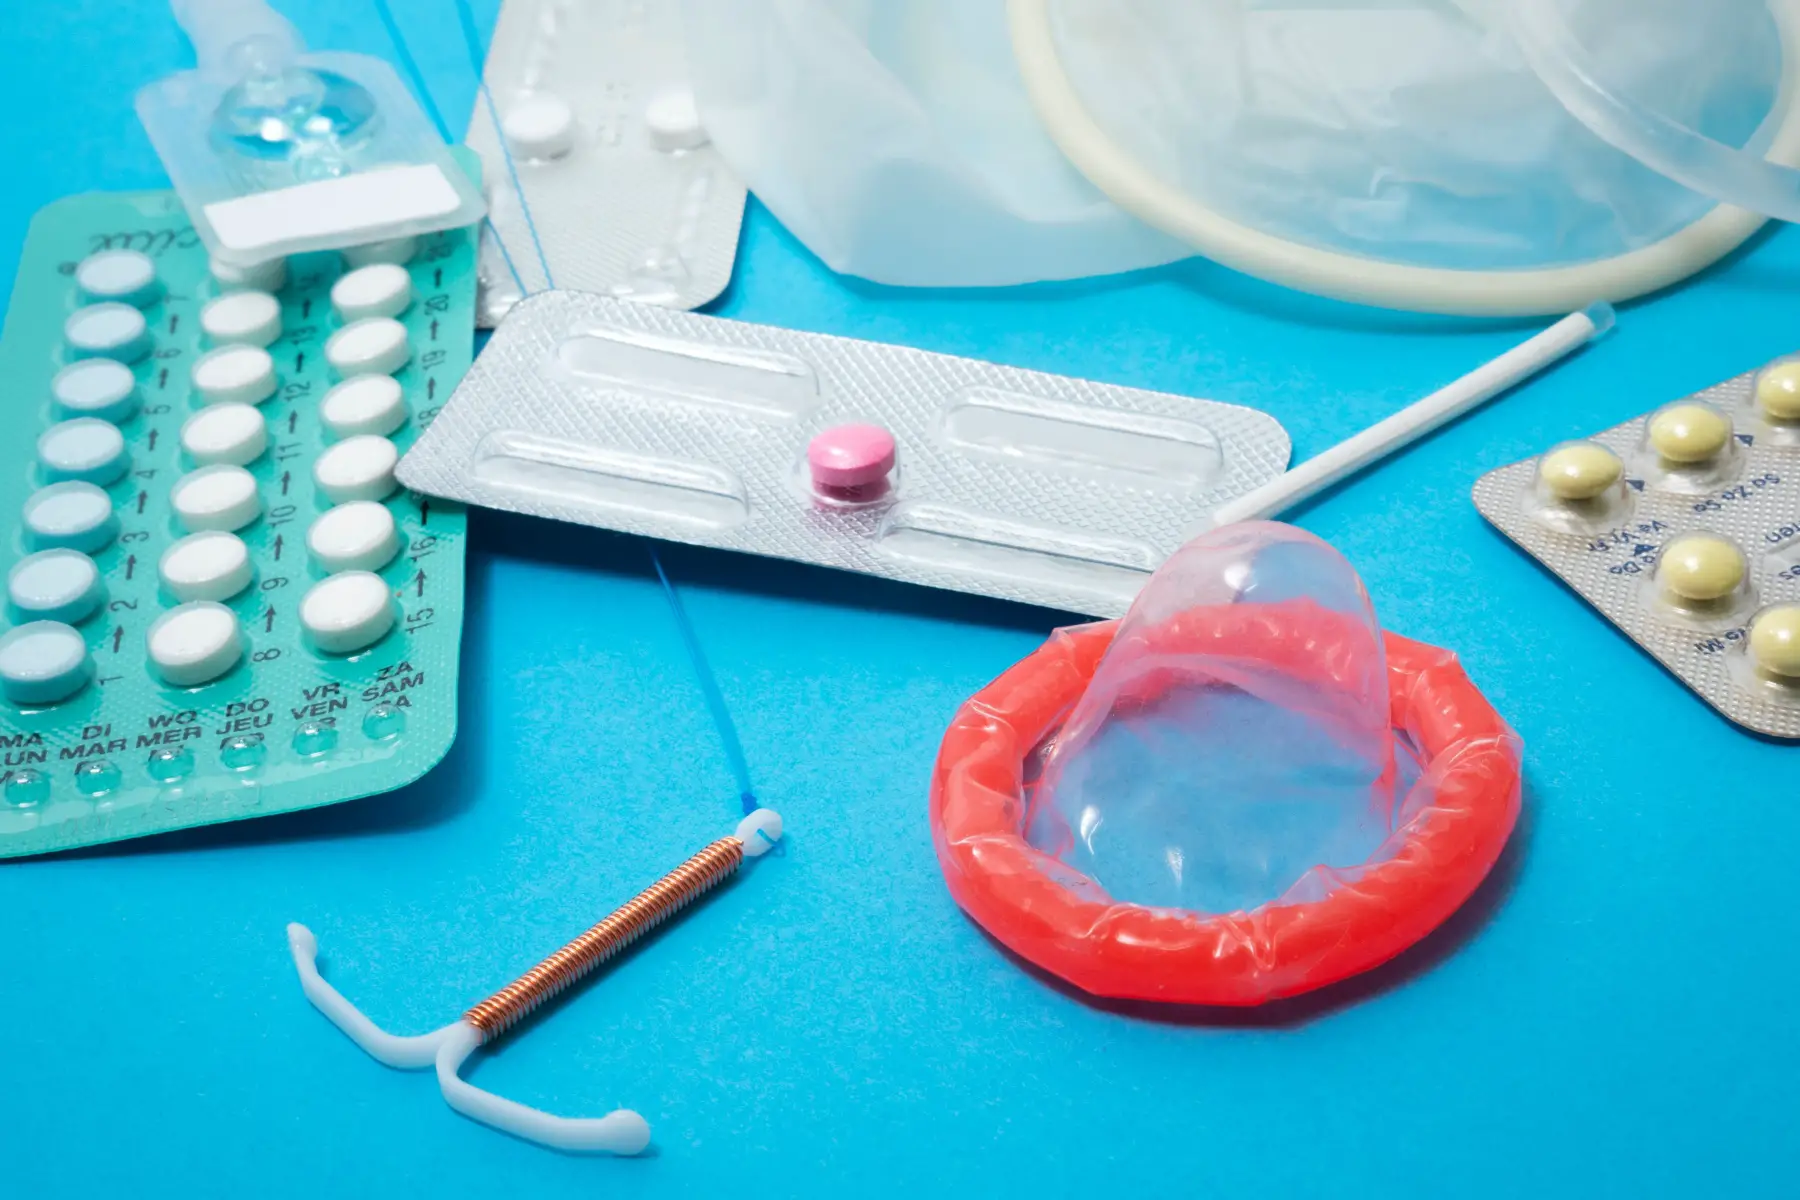 Different contraceptive items on a blue background